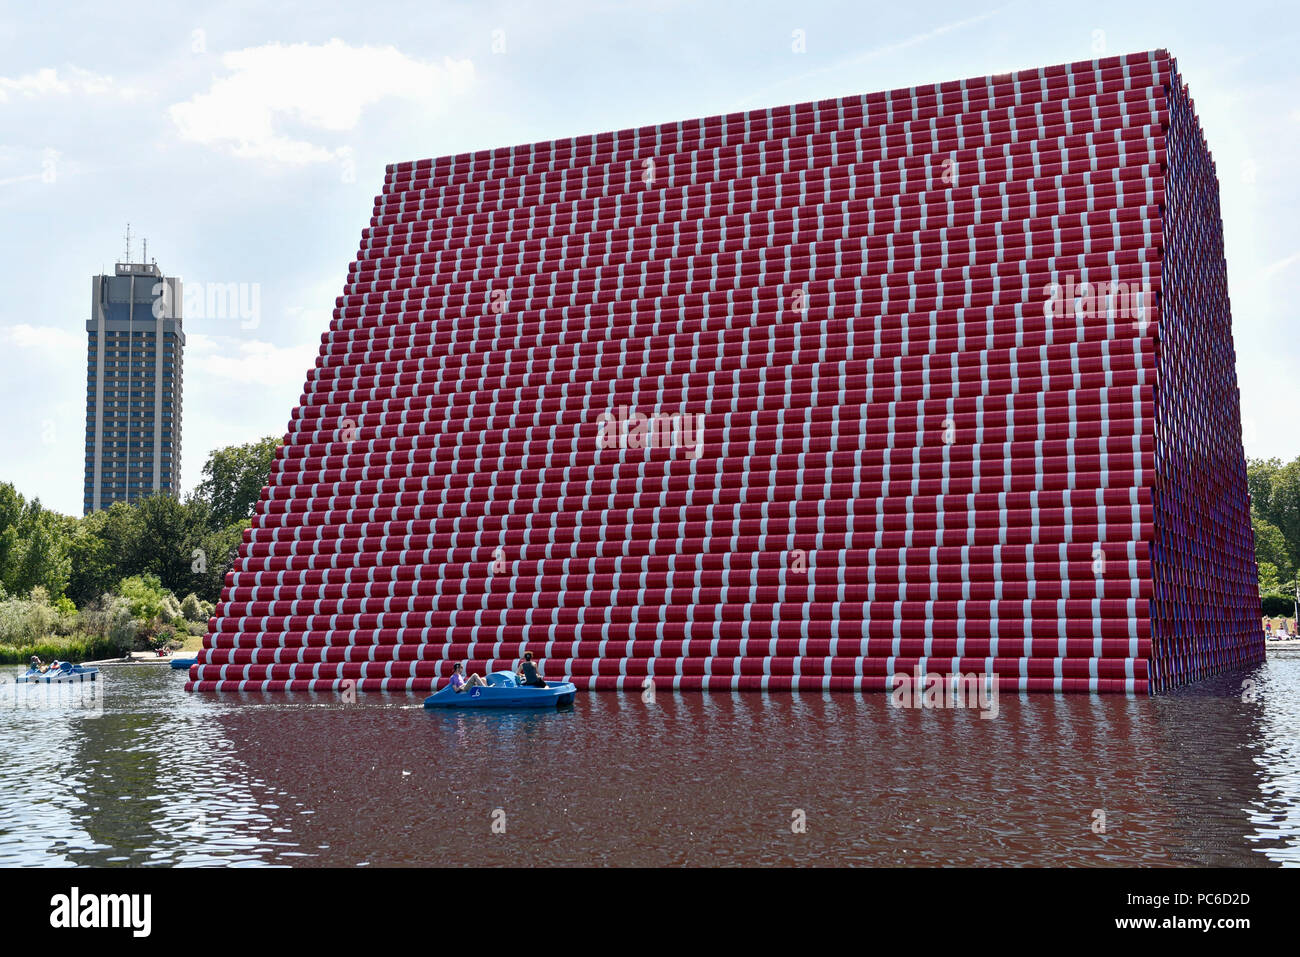 London, UK.  1 August 2018. UK Weather - People in pedal boats pass by 'The London Mastaba' on The Serpentine during warm weather in Hyde Park. The sculpture by artist Christo and Jeanne-Claude comprises 7,506 horizontally-stacked coloured barrels, in hues of red, blue, mauve and white, secured on a floating platform.  The geometric form takes inspiration from ancient mastabas from Mesopotamia and will be on display until 21 September 2018. Temperatures are forecast to increase back to the 30s in time for the weekend.  Credit: Stephen Chung / Alamy Live News Stock Photo